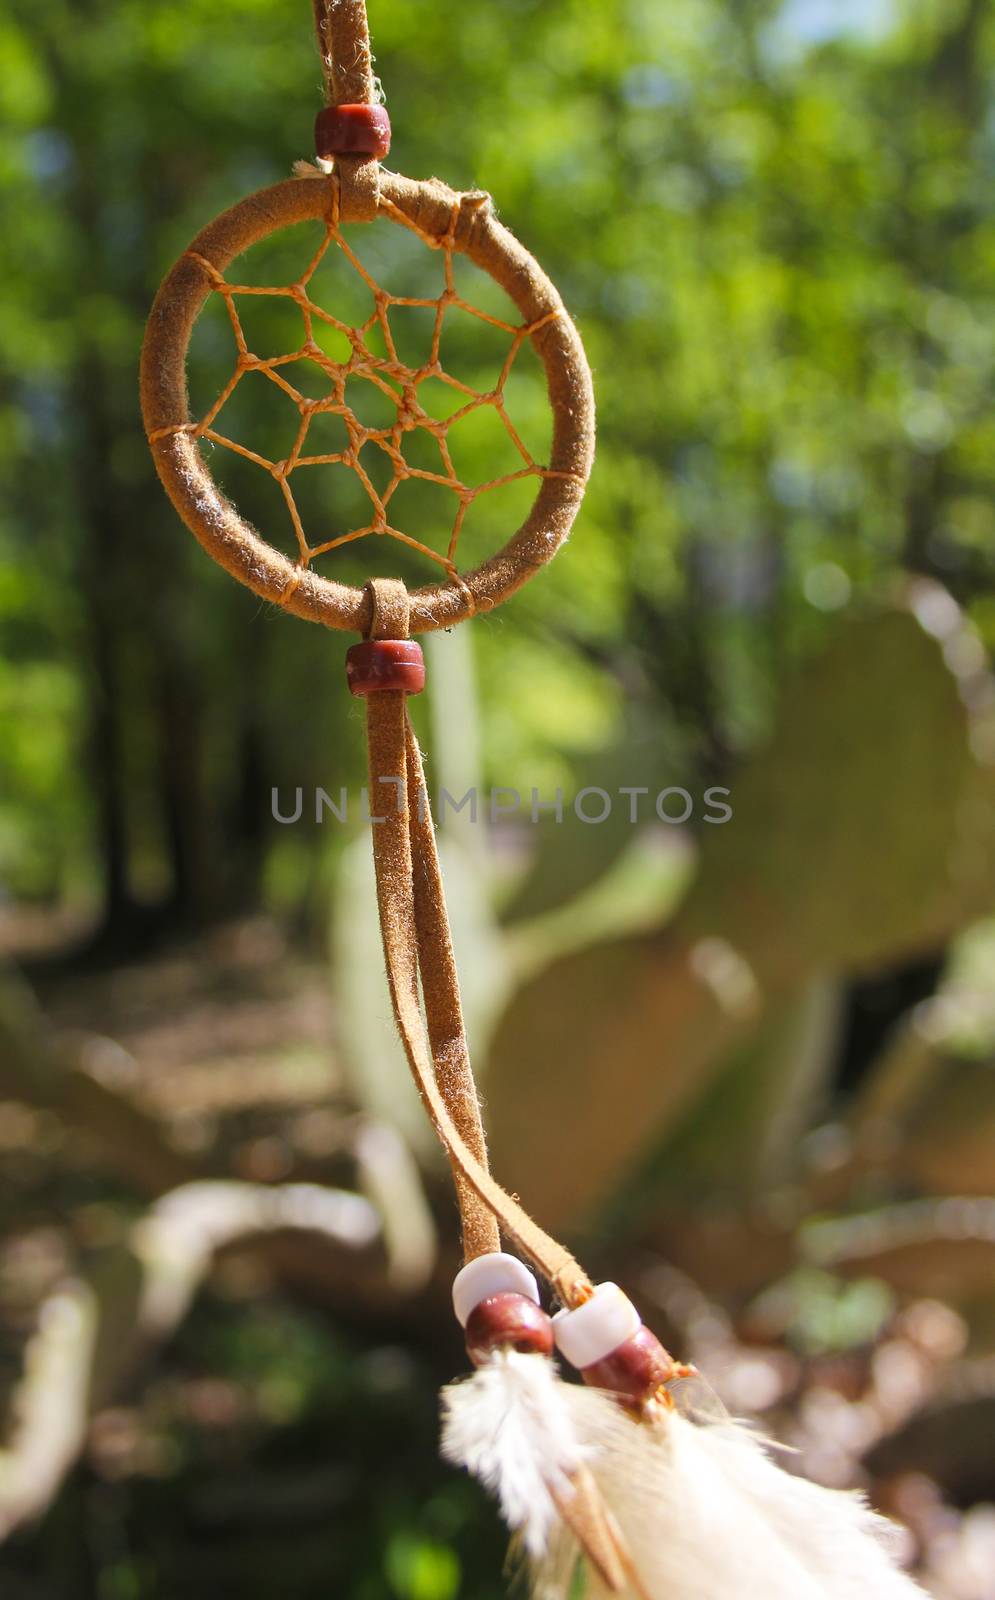 Dreamcatcher outdoors with cactus in background